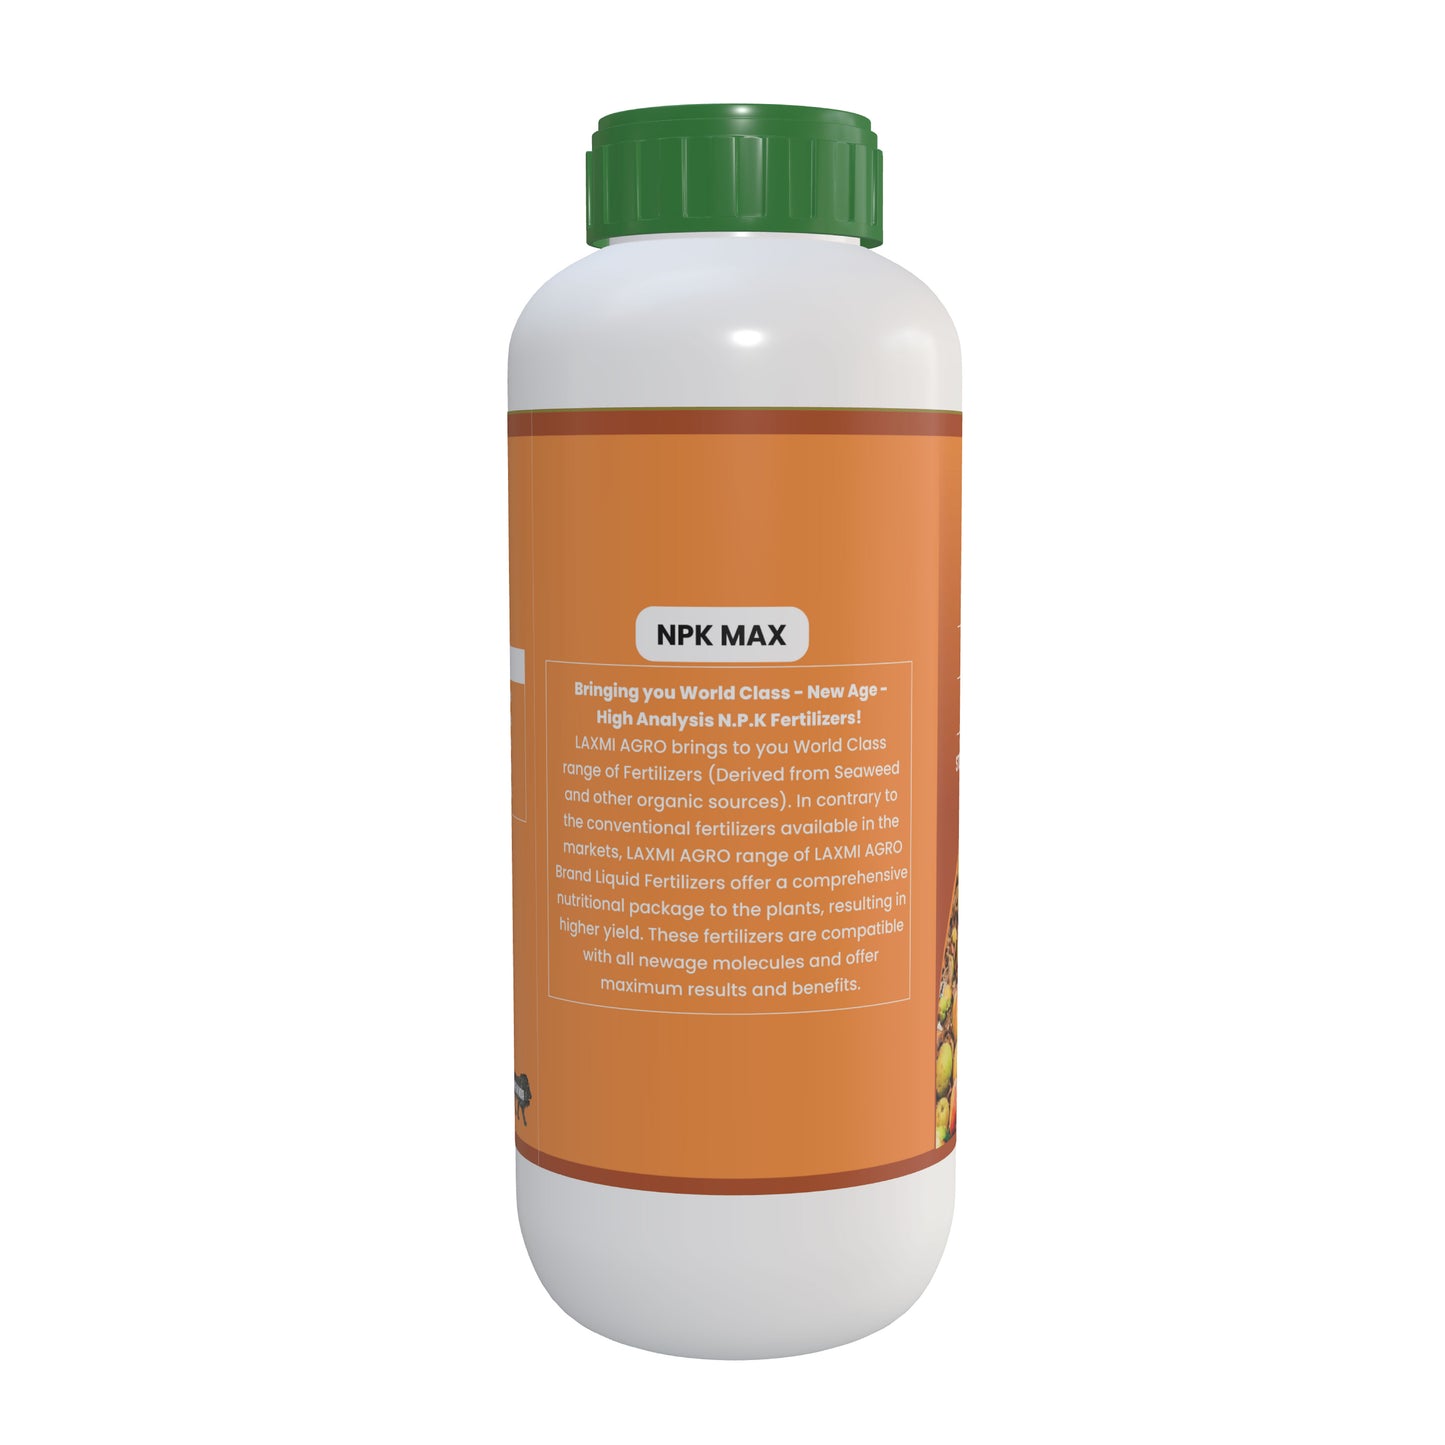 Laxmi Agro NPK Fluid 40 Max Fertilizer | Boost Your Harvest | High-Analysis Liquid Fertilizer | Stop dropping of fruits from plant | Strong to holding fruit of plant | 1 Liter